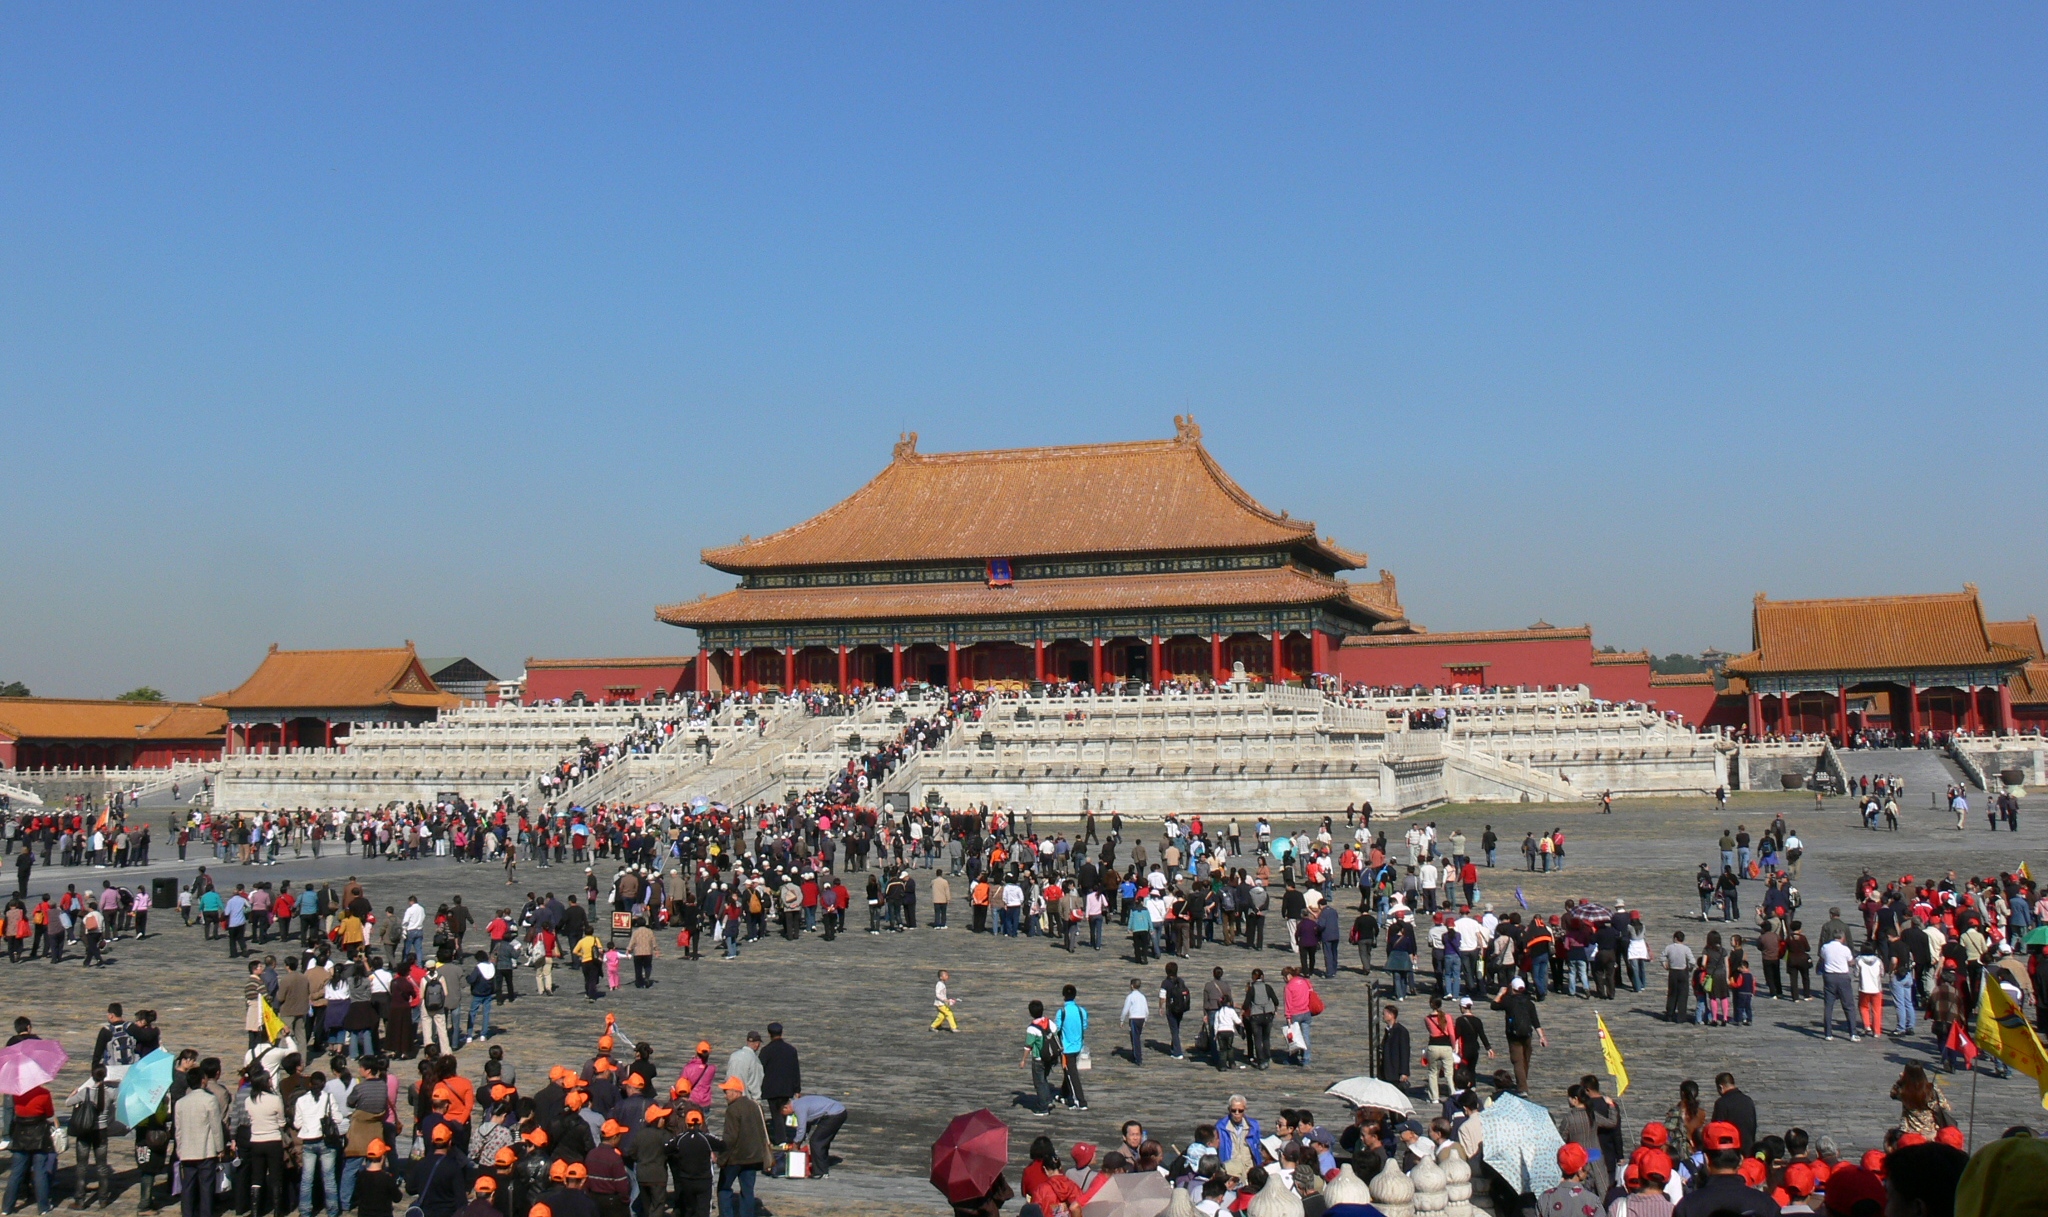 First Forecast in January Forbidden City Now Limits Visitors to 80,000